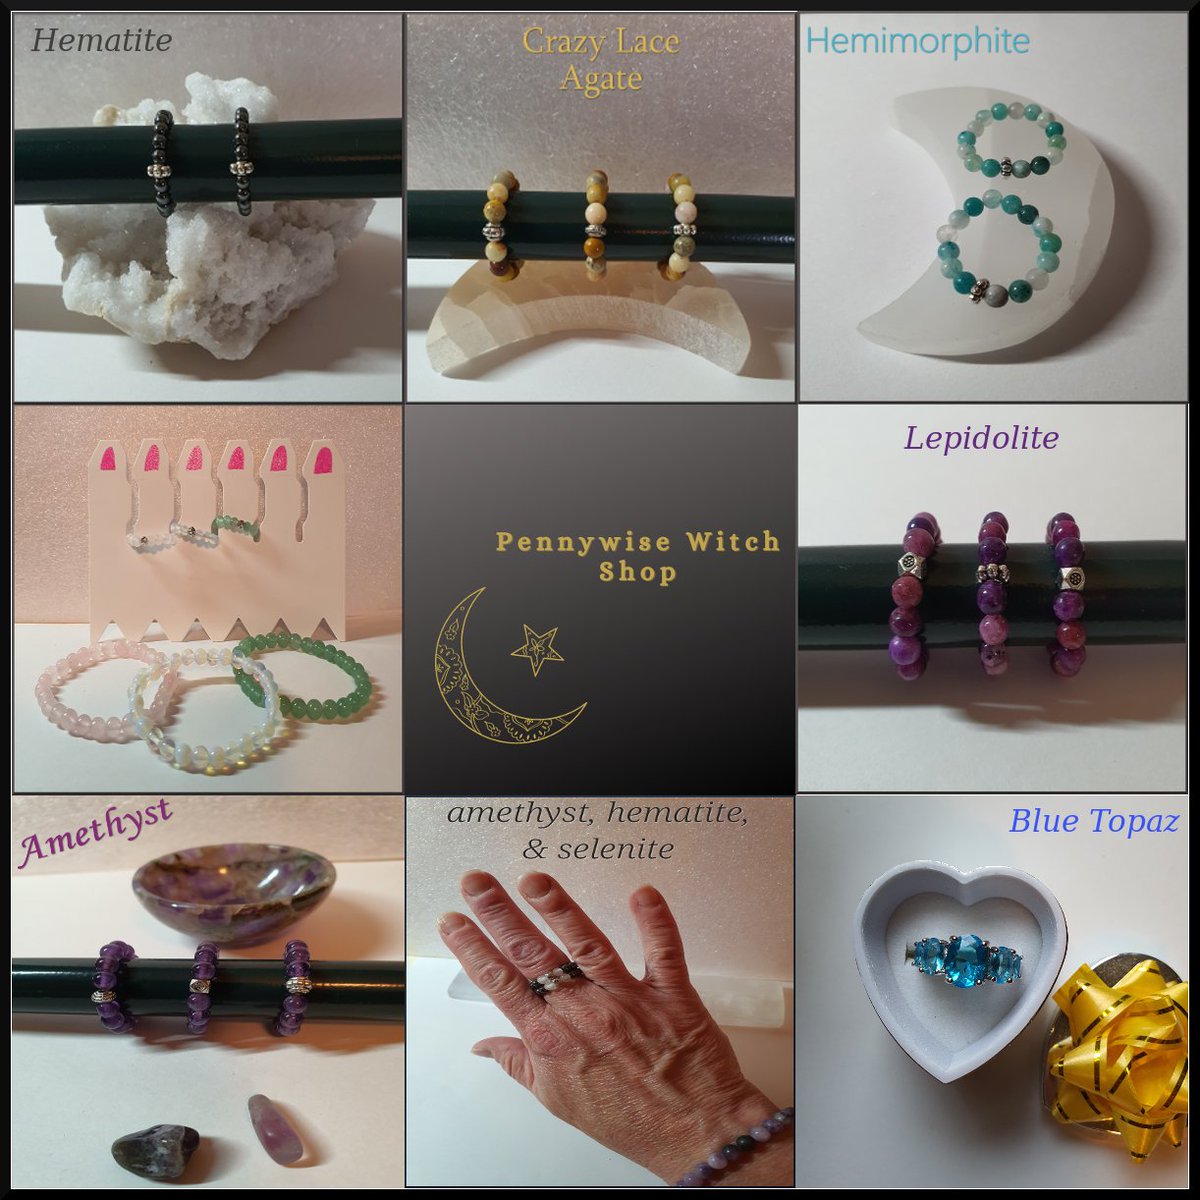 Just some of the gorgeous handmade rings in the shop! 😍

pennywisewitchshop.etsy.com

#womanownedbusiness #shopsmallbusiness #supportsmallbusiness #crystals #crystalshop #handmade #giftshop #savemoney #PennywiseWitchShop #rings #Gemstone #gemstonerings #handmadejewelry